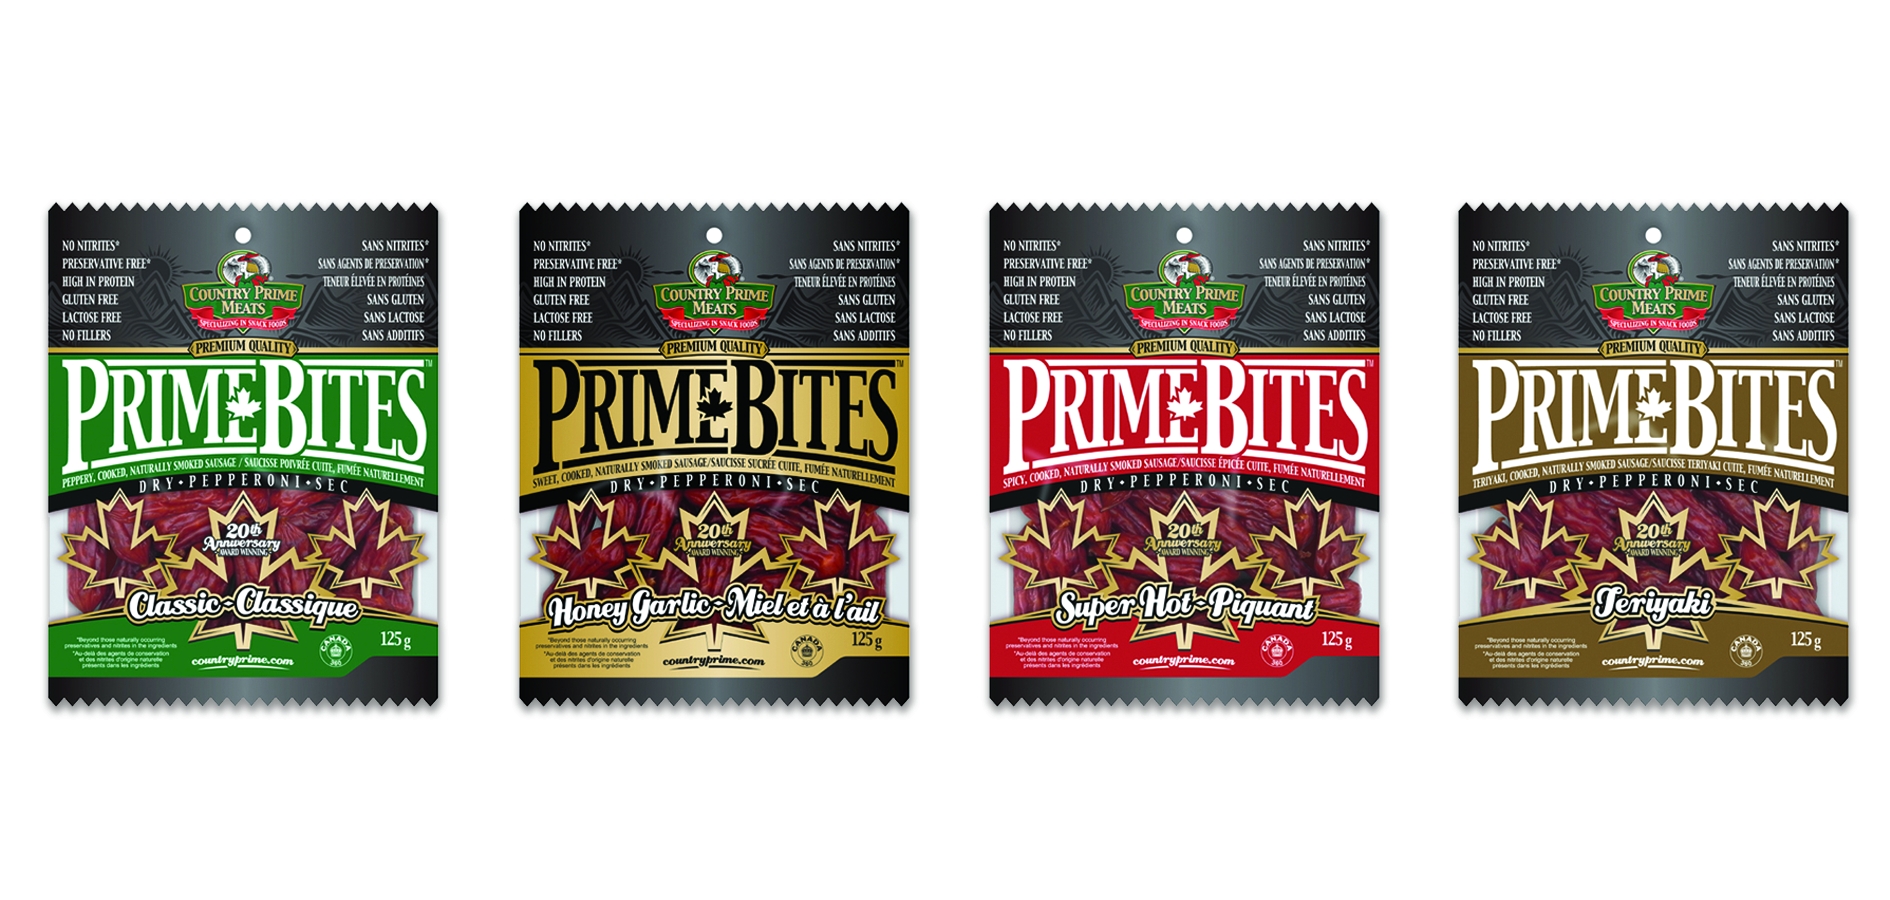 Country Prime Meats image 2017